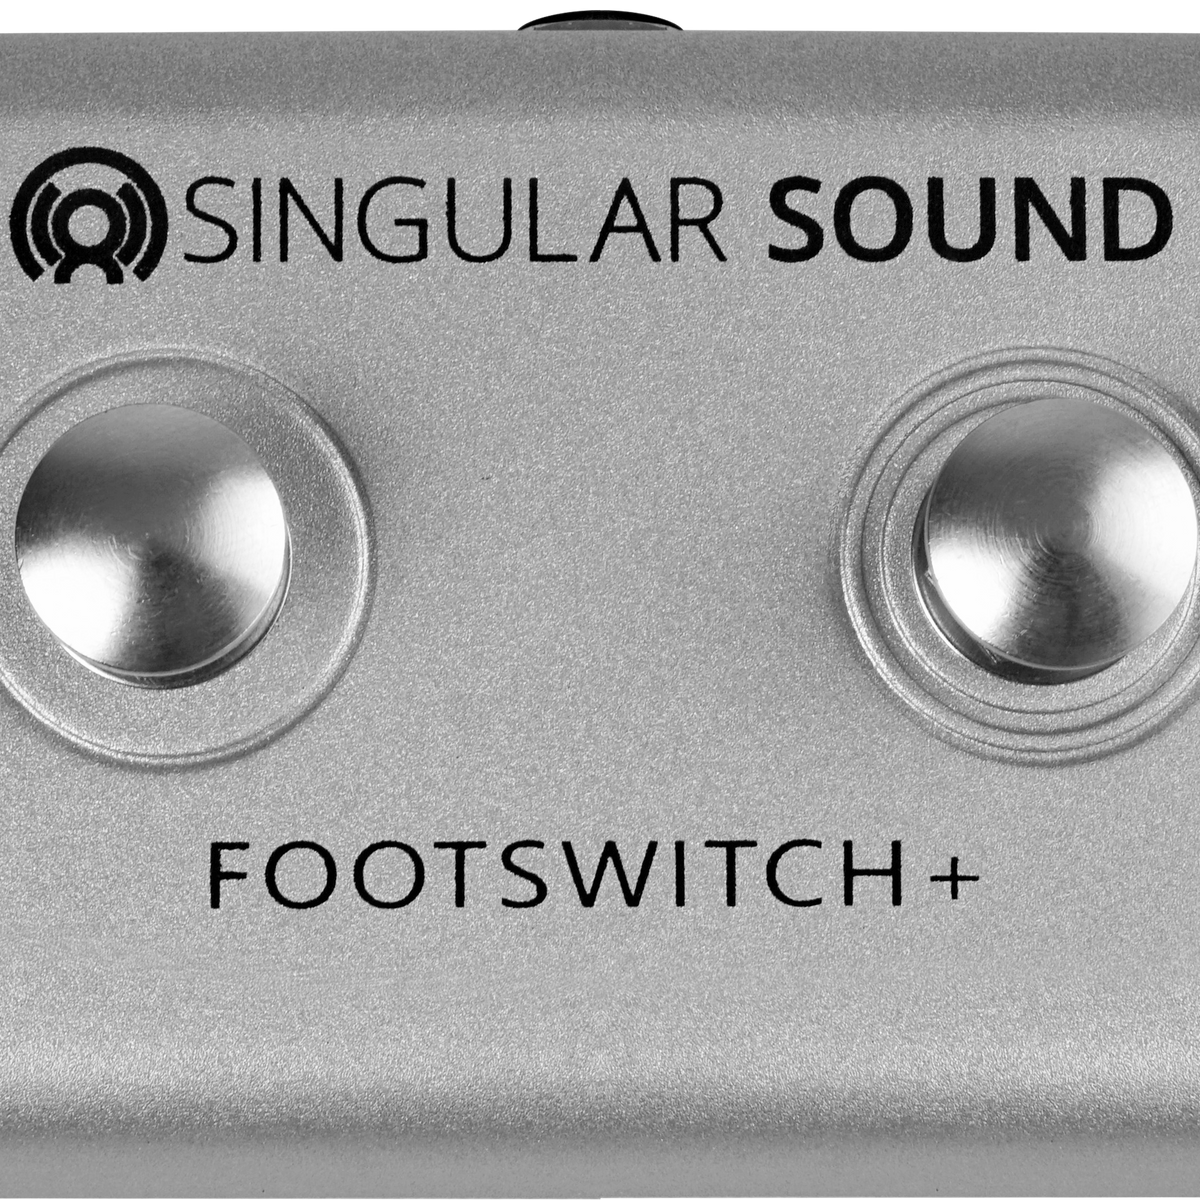 Footswitch+: 4 Ways to Master Your Foot Switch Pedal